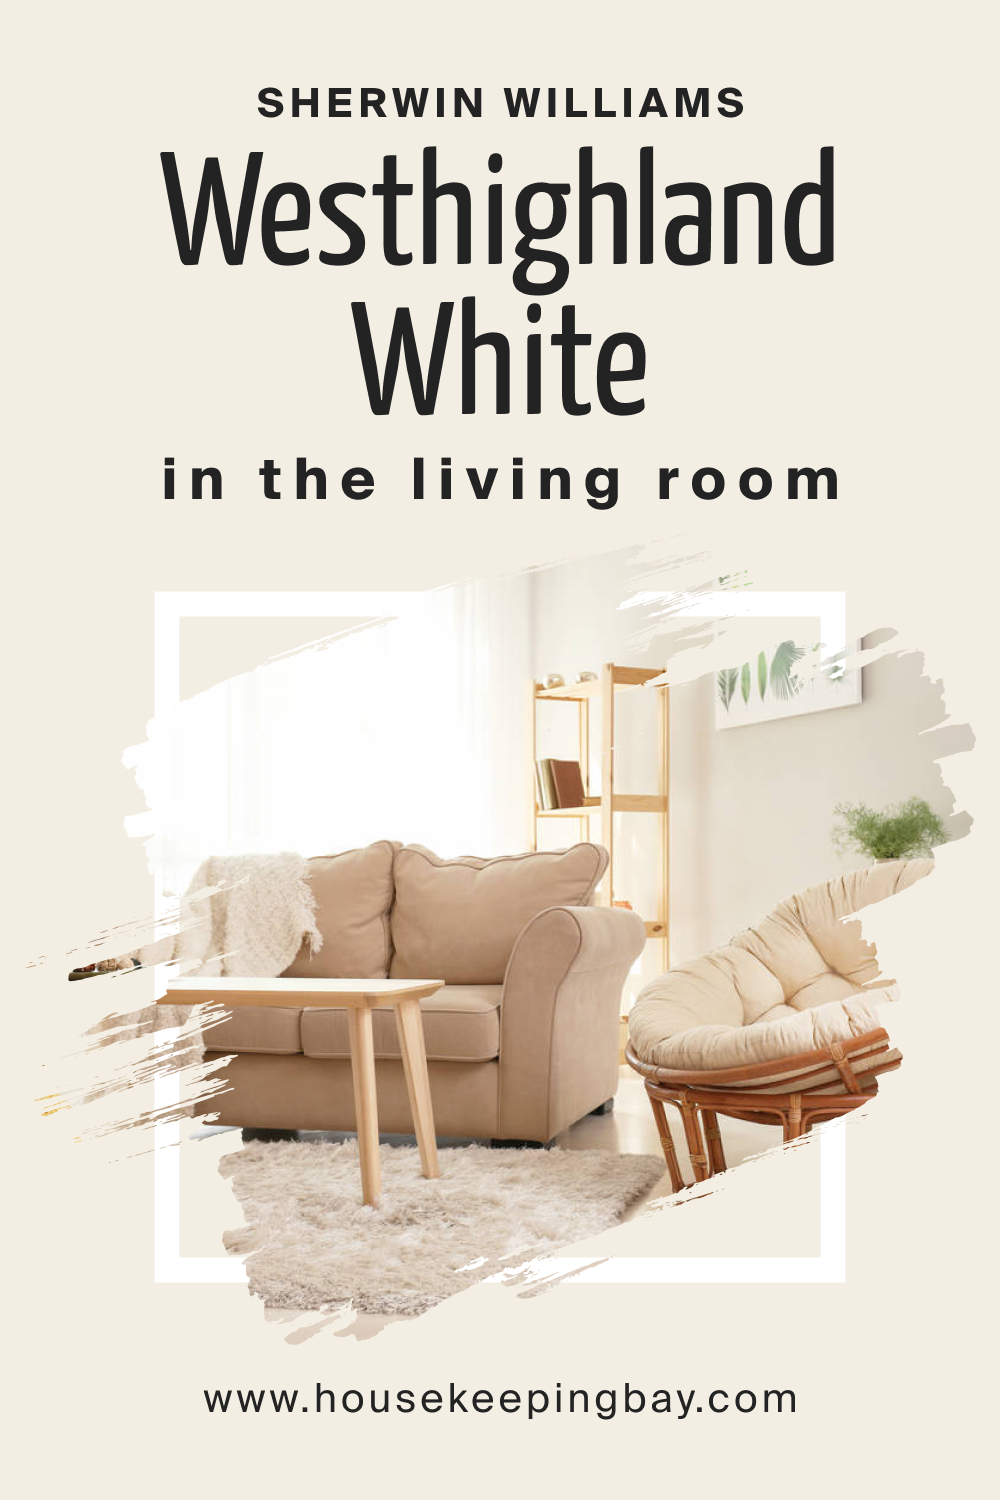 Sherwin Williams. Westhighland White SW 7566 In the Living Room